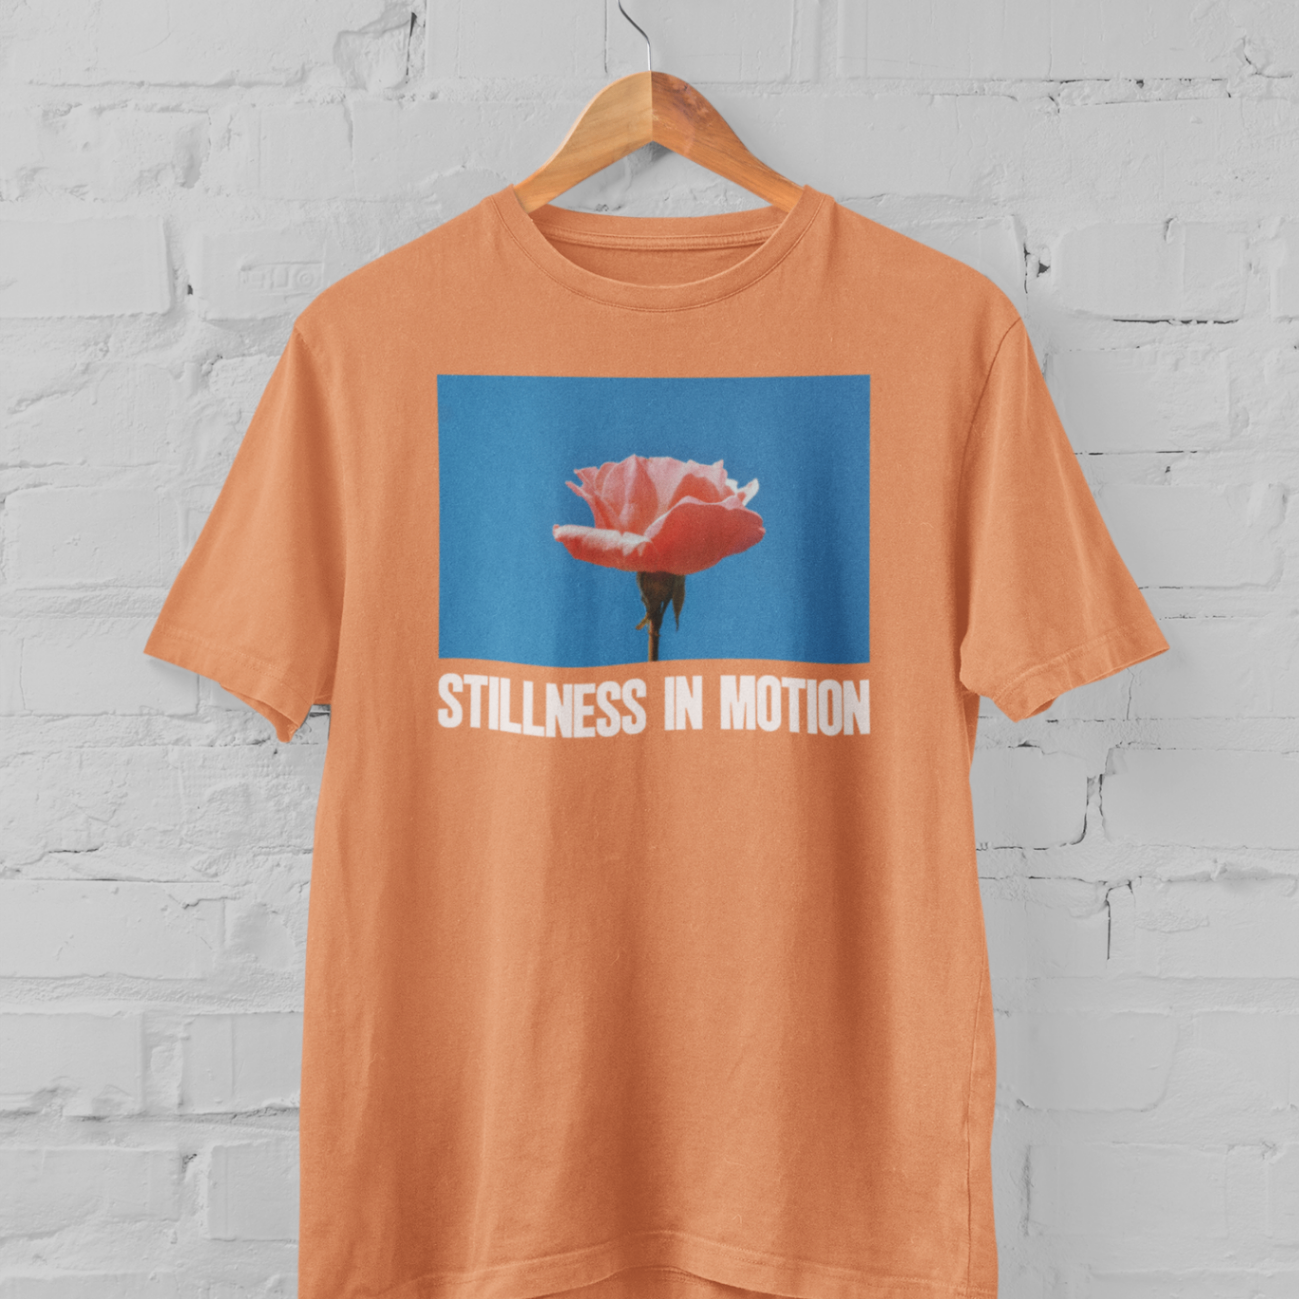 a sunset orange tshirt with stillness in motion written in text under a pink flower over a sky blue backround